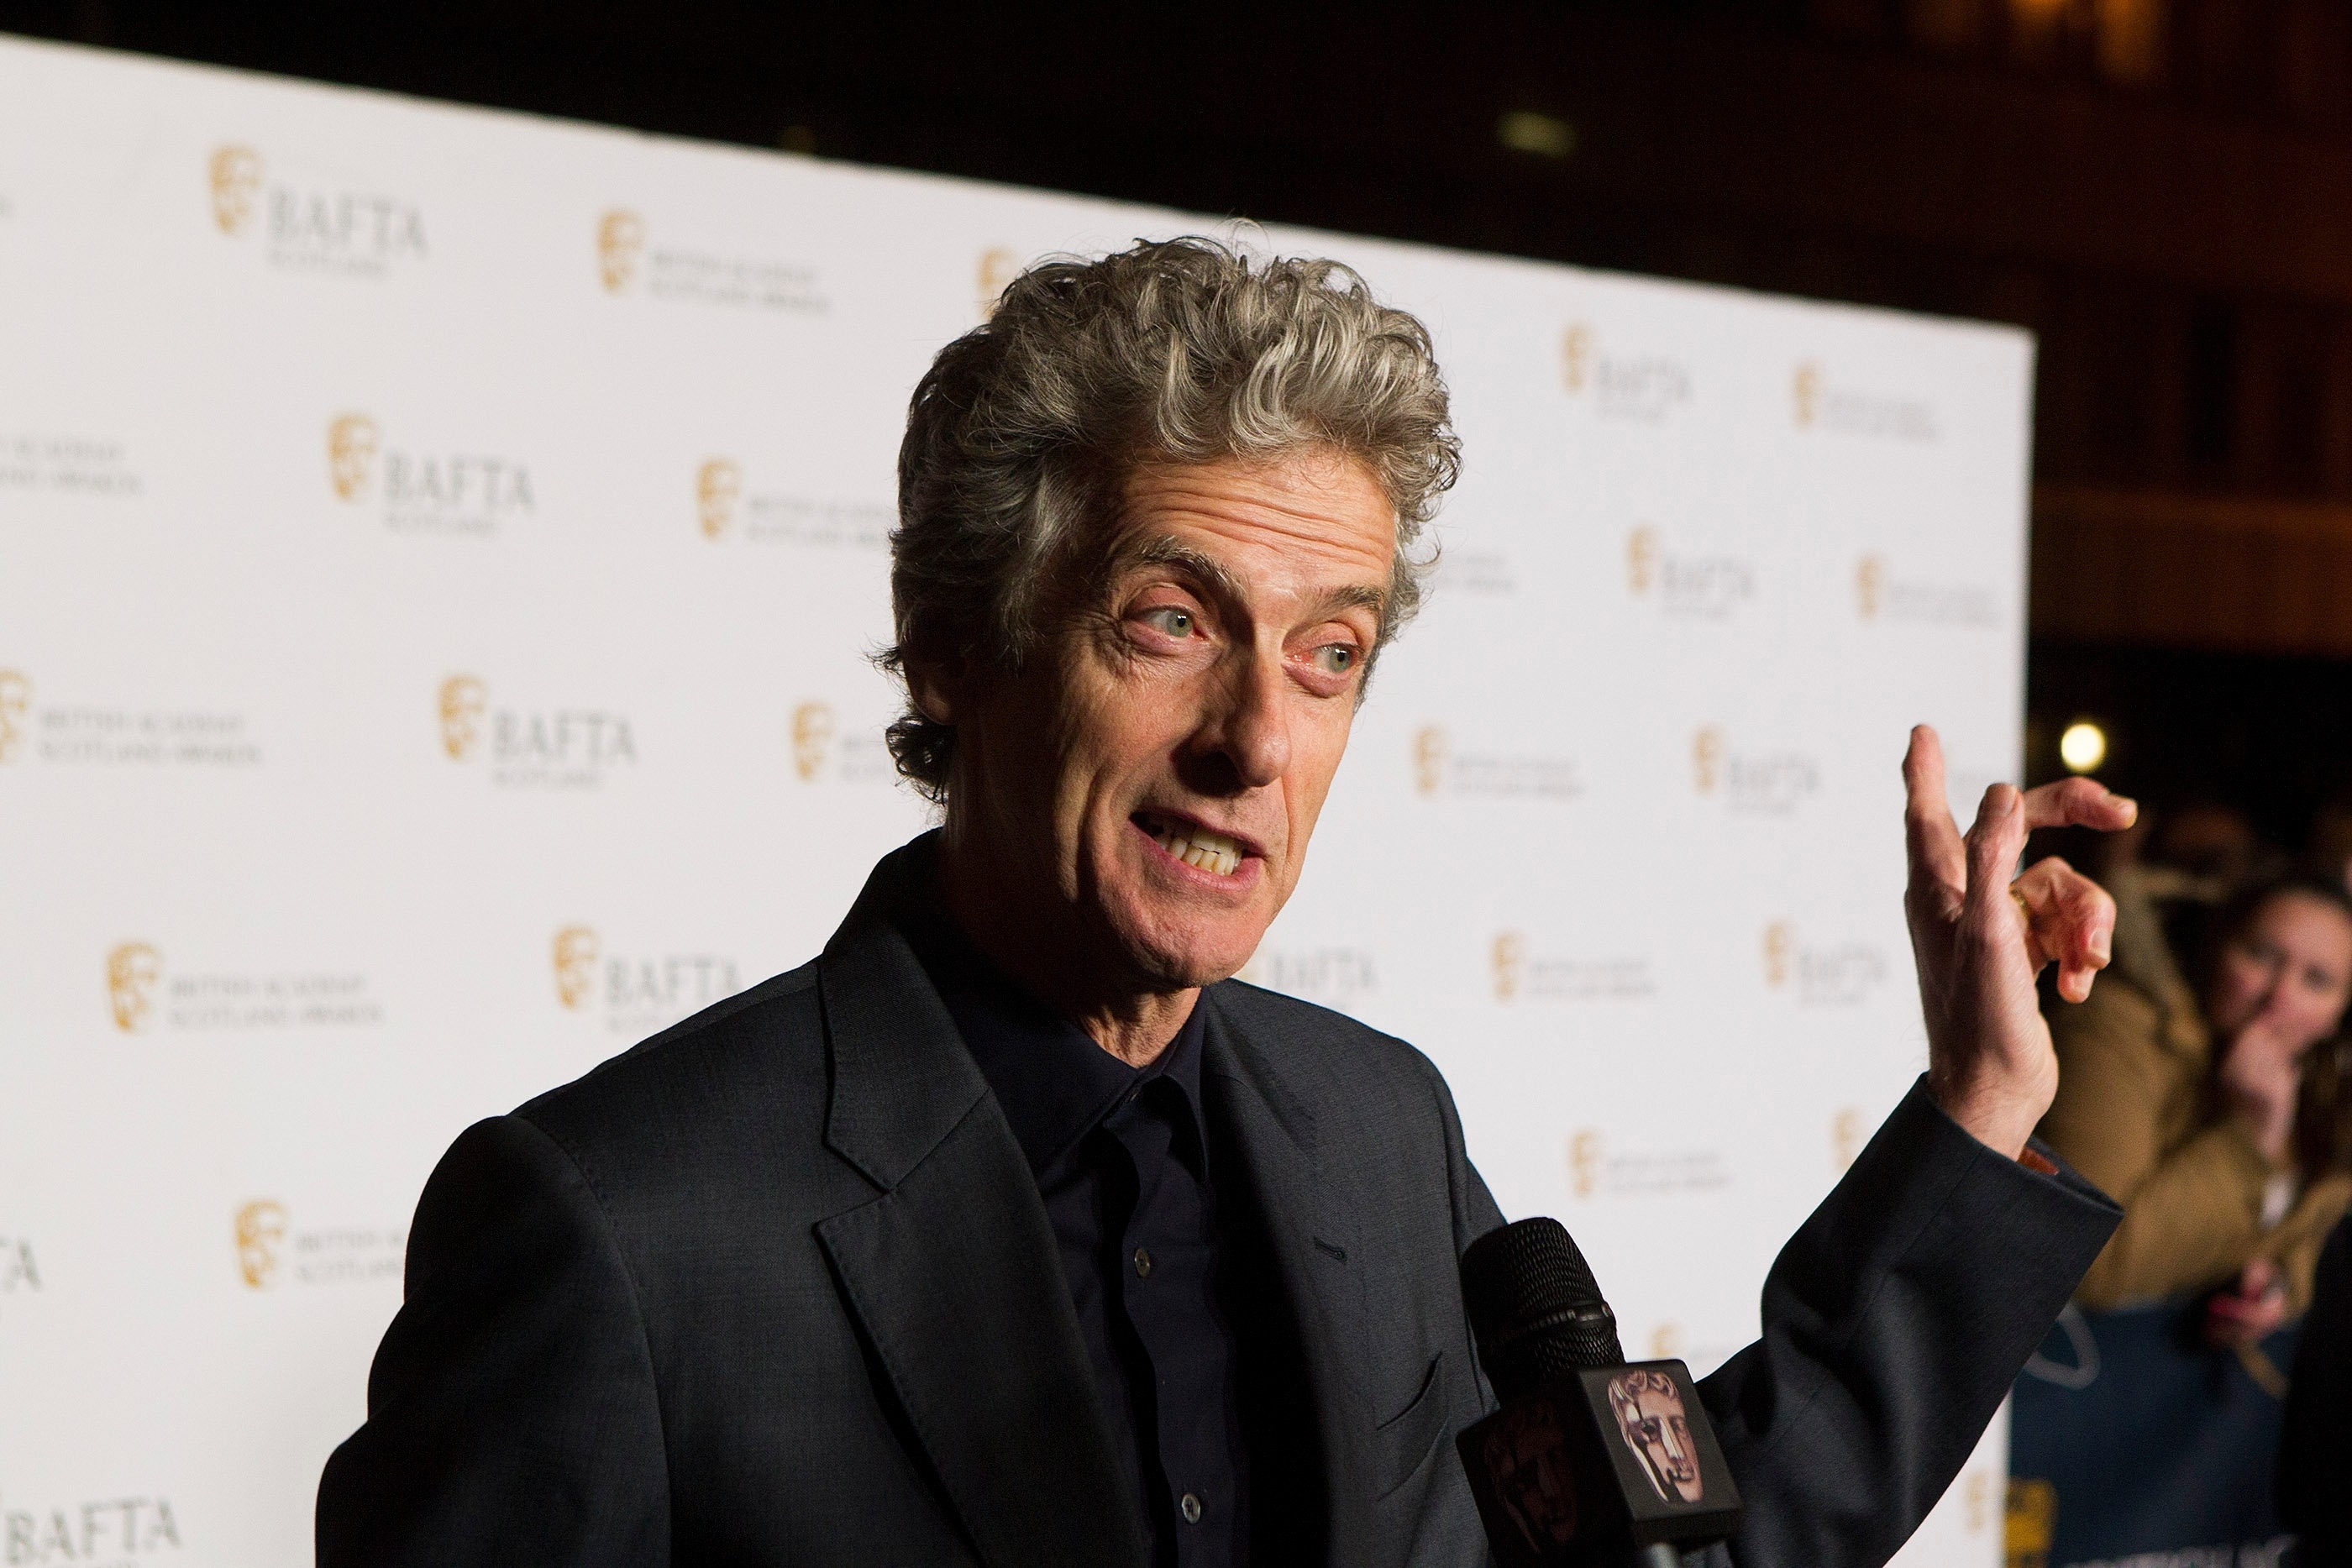 Dr Who actor Peter Capaldi on the red carpet at the BAFTA Scotland Awards held at the Radisson Blu, Glasgow. The awards honour the very best Scottish talent in film, television and video games industries. Nov 6 2016